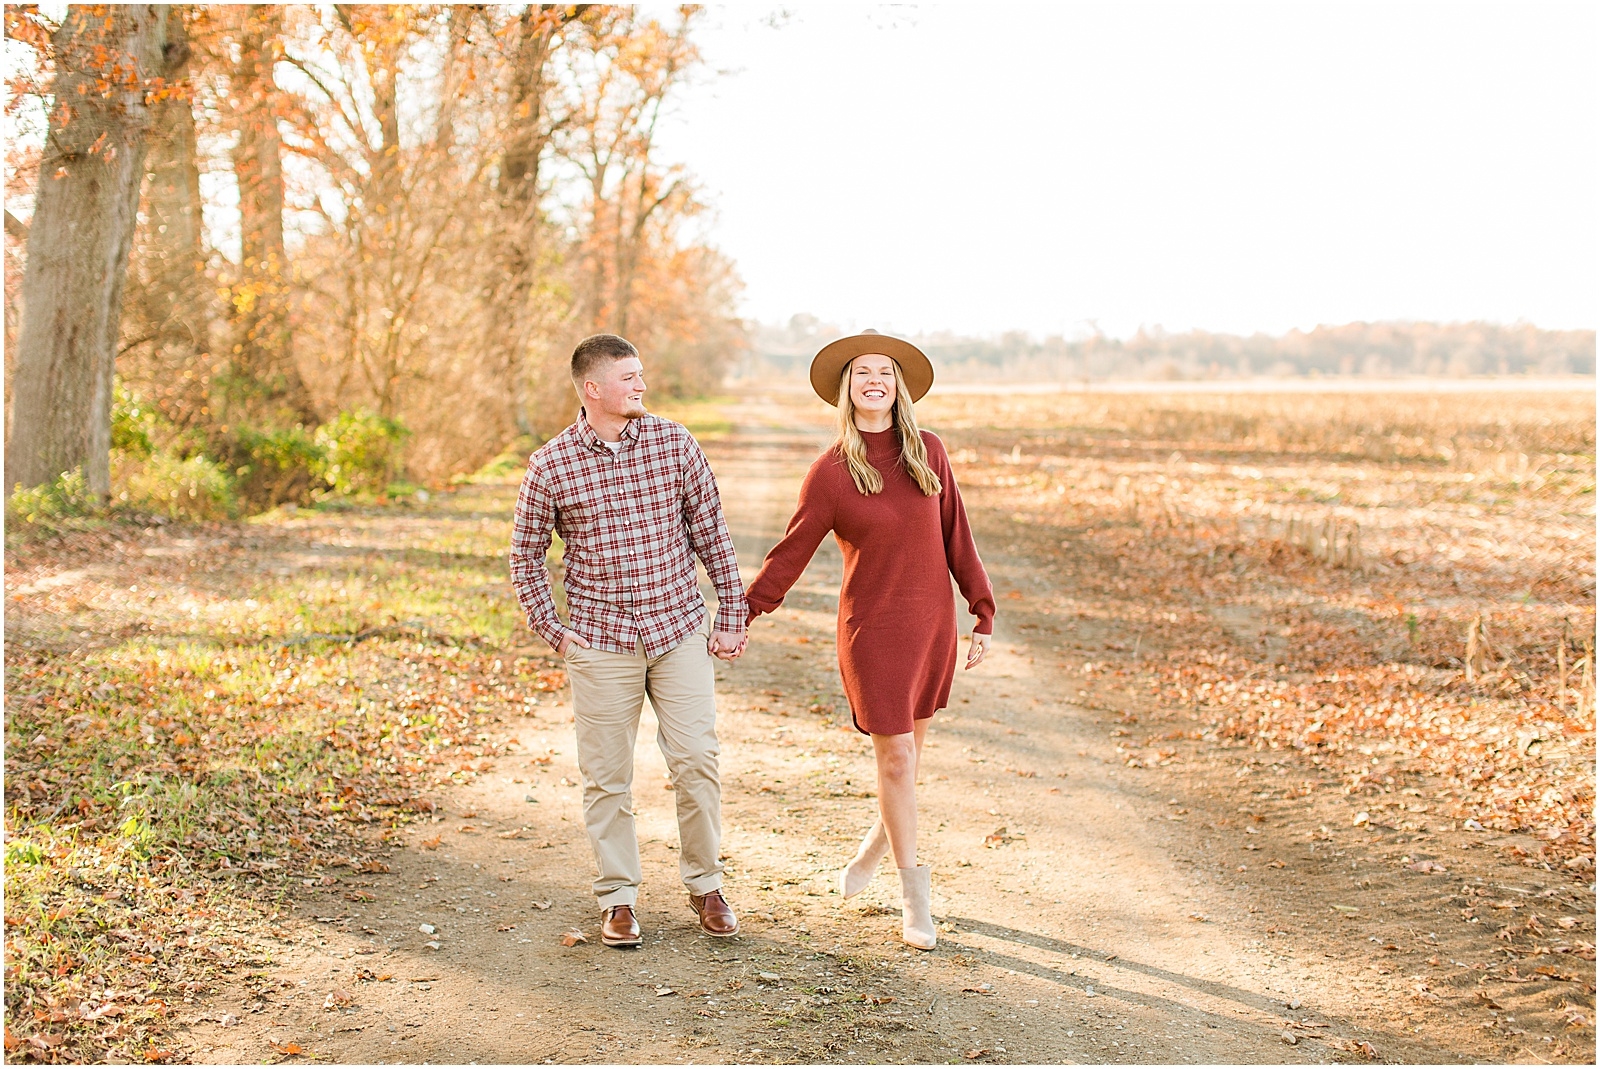 A Fall Southern Indiana Engagement Seesion | Cody and Hannah | Bret and Brandie Photography 003.jpg